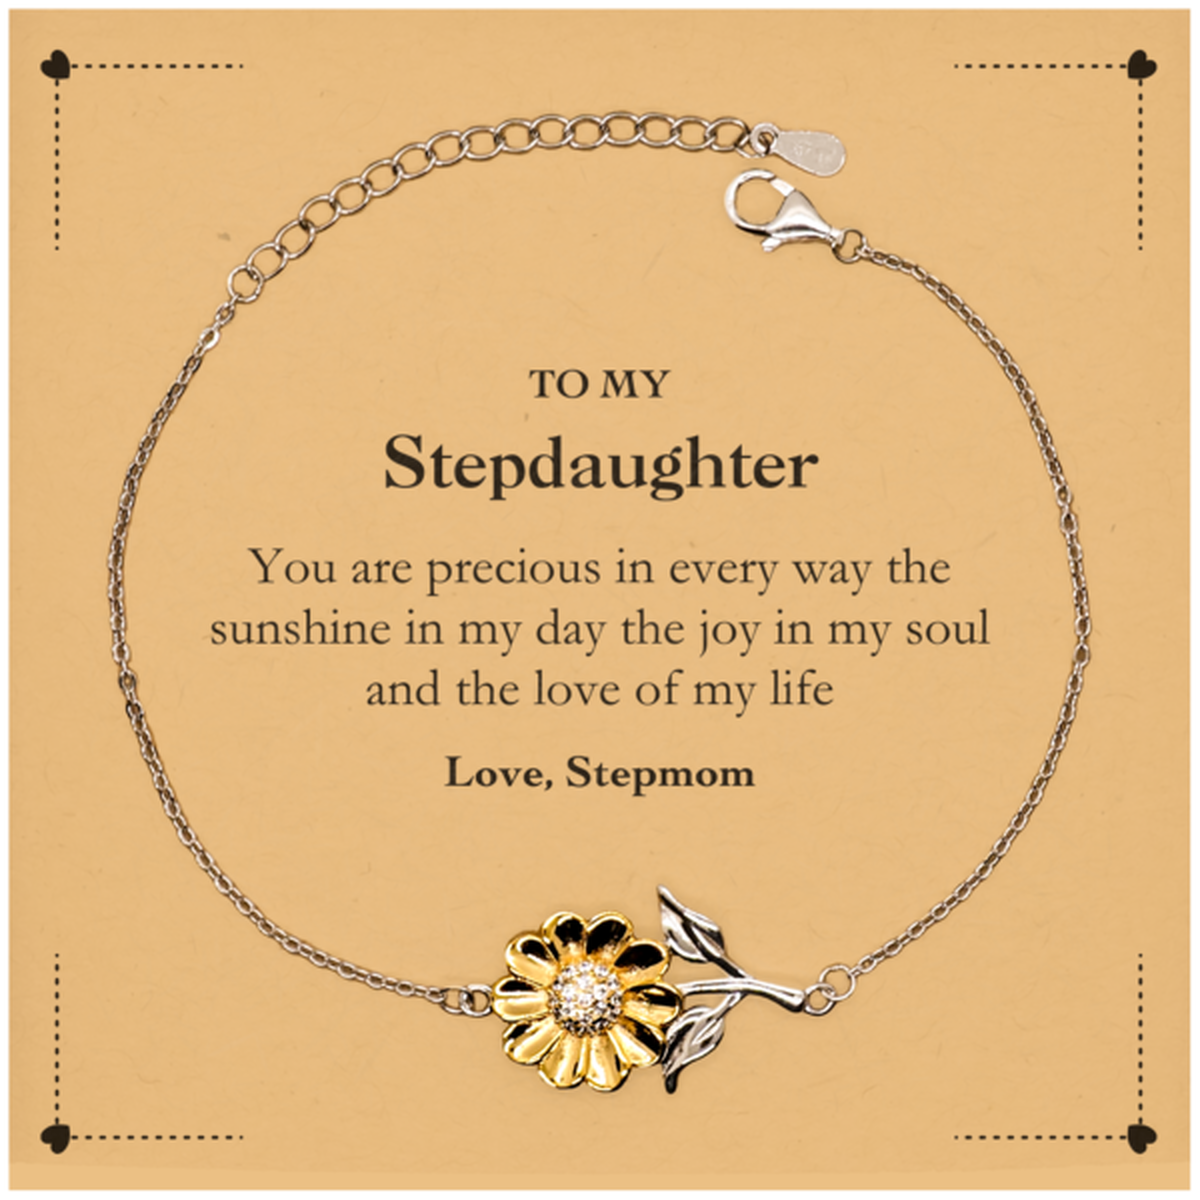 Graduation Gifts for Stepdaughter Sunflower Bracelet Present from Stepmom, Christmas Stepdaughter Birthday Gifts Stepdaughter You are precious in every way the sunshine in my day. Love, Stepmom